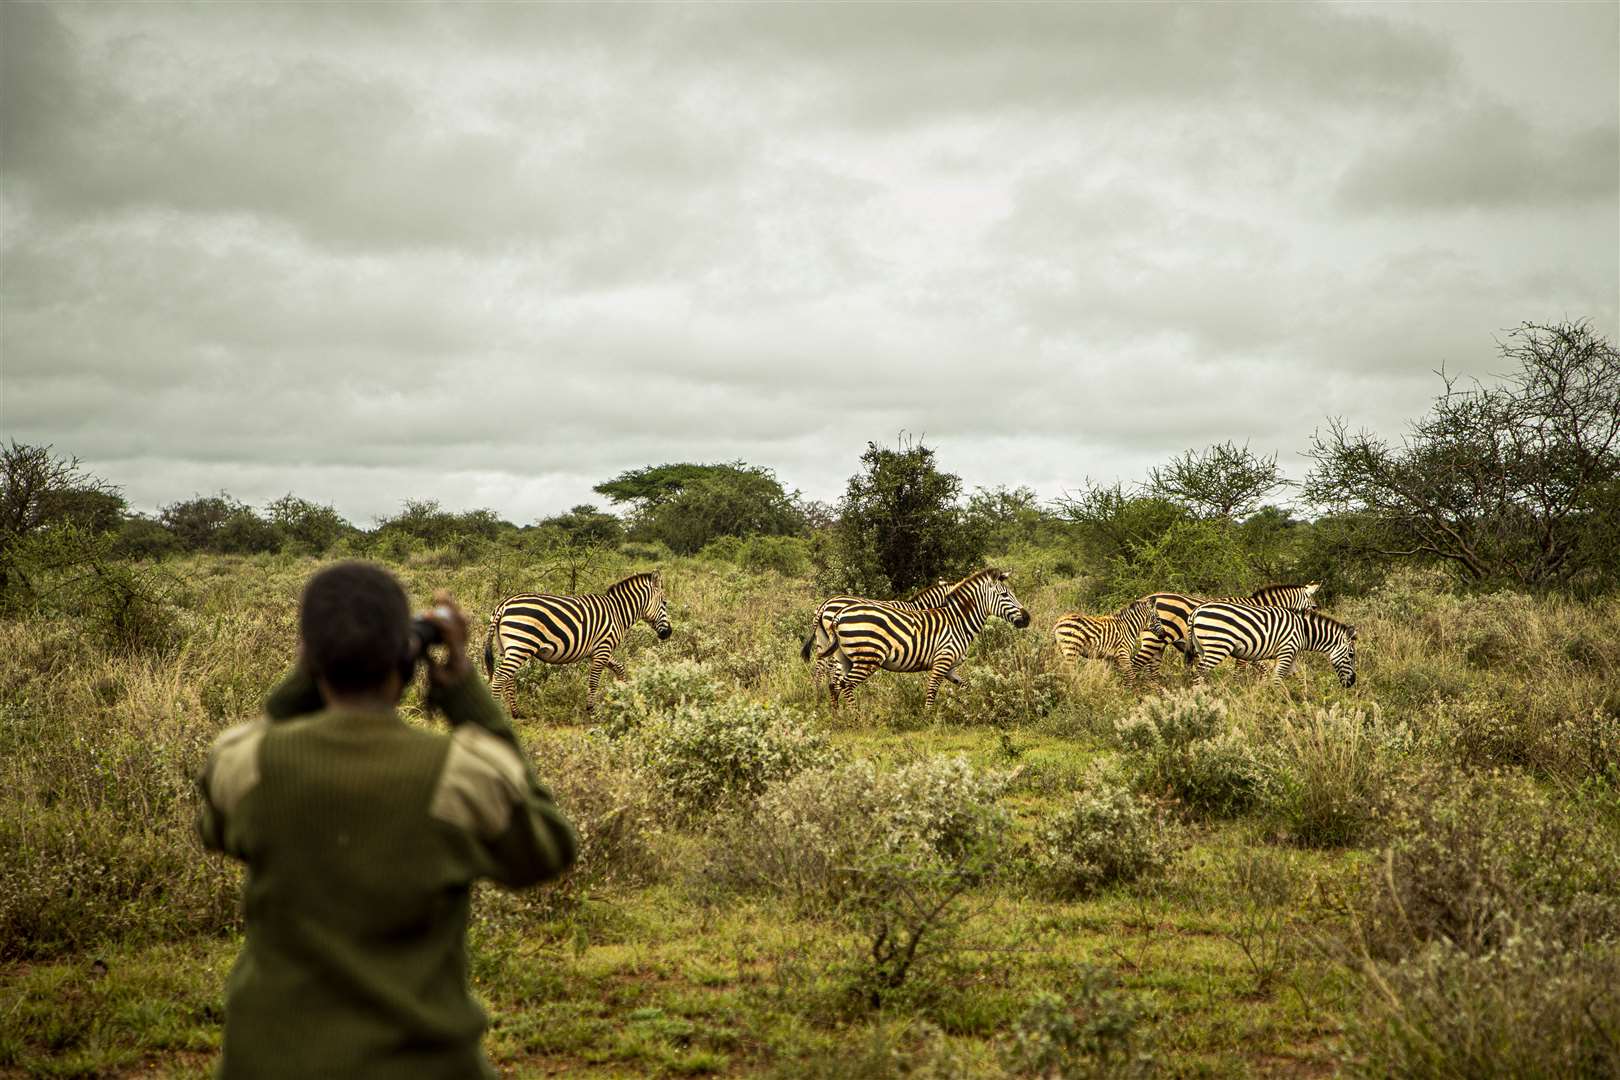 Community ranger Ruth Sikeita carries out a daily wildlife patrol in Kenya (IFAW/Will Swanson/PA)